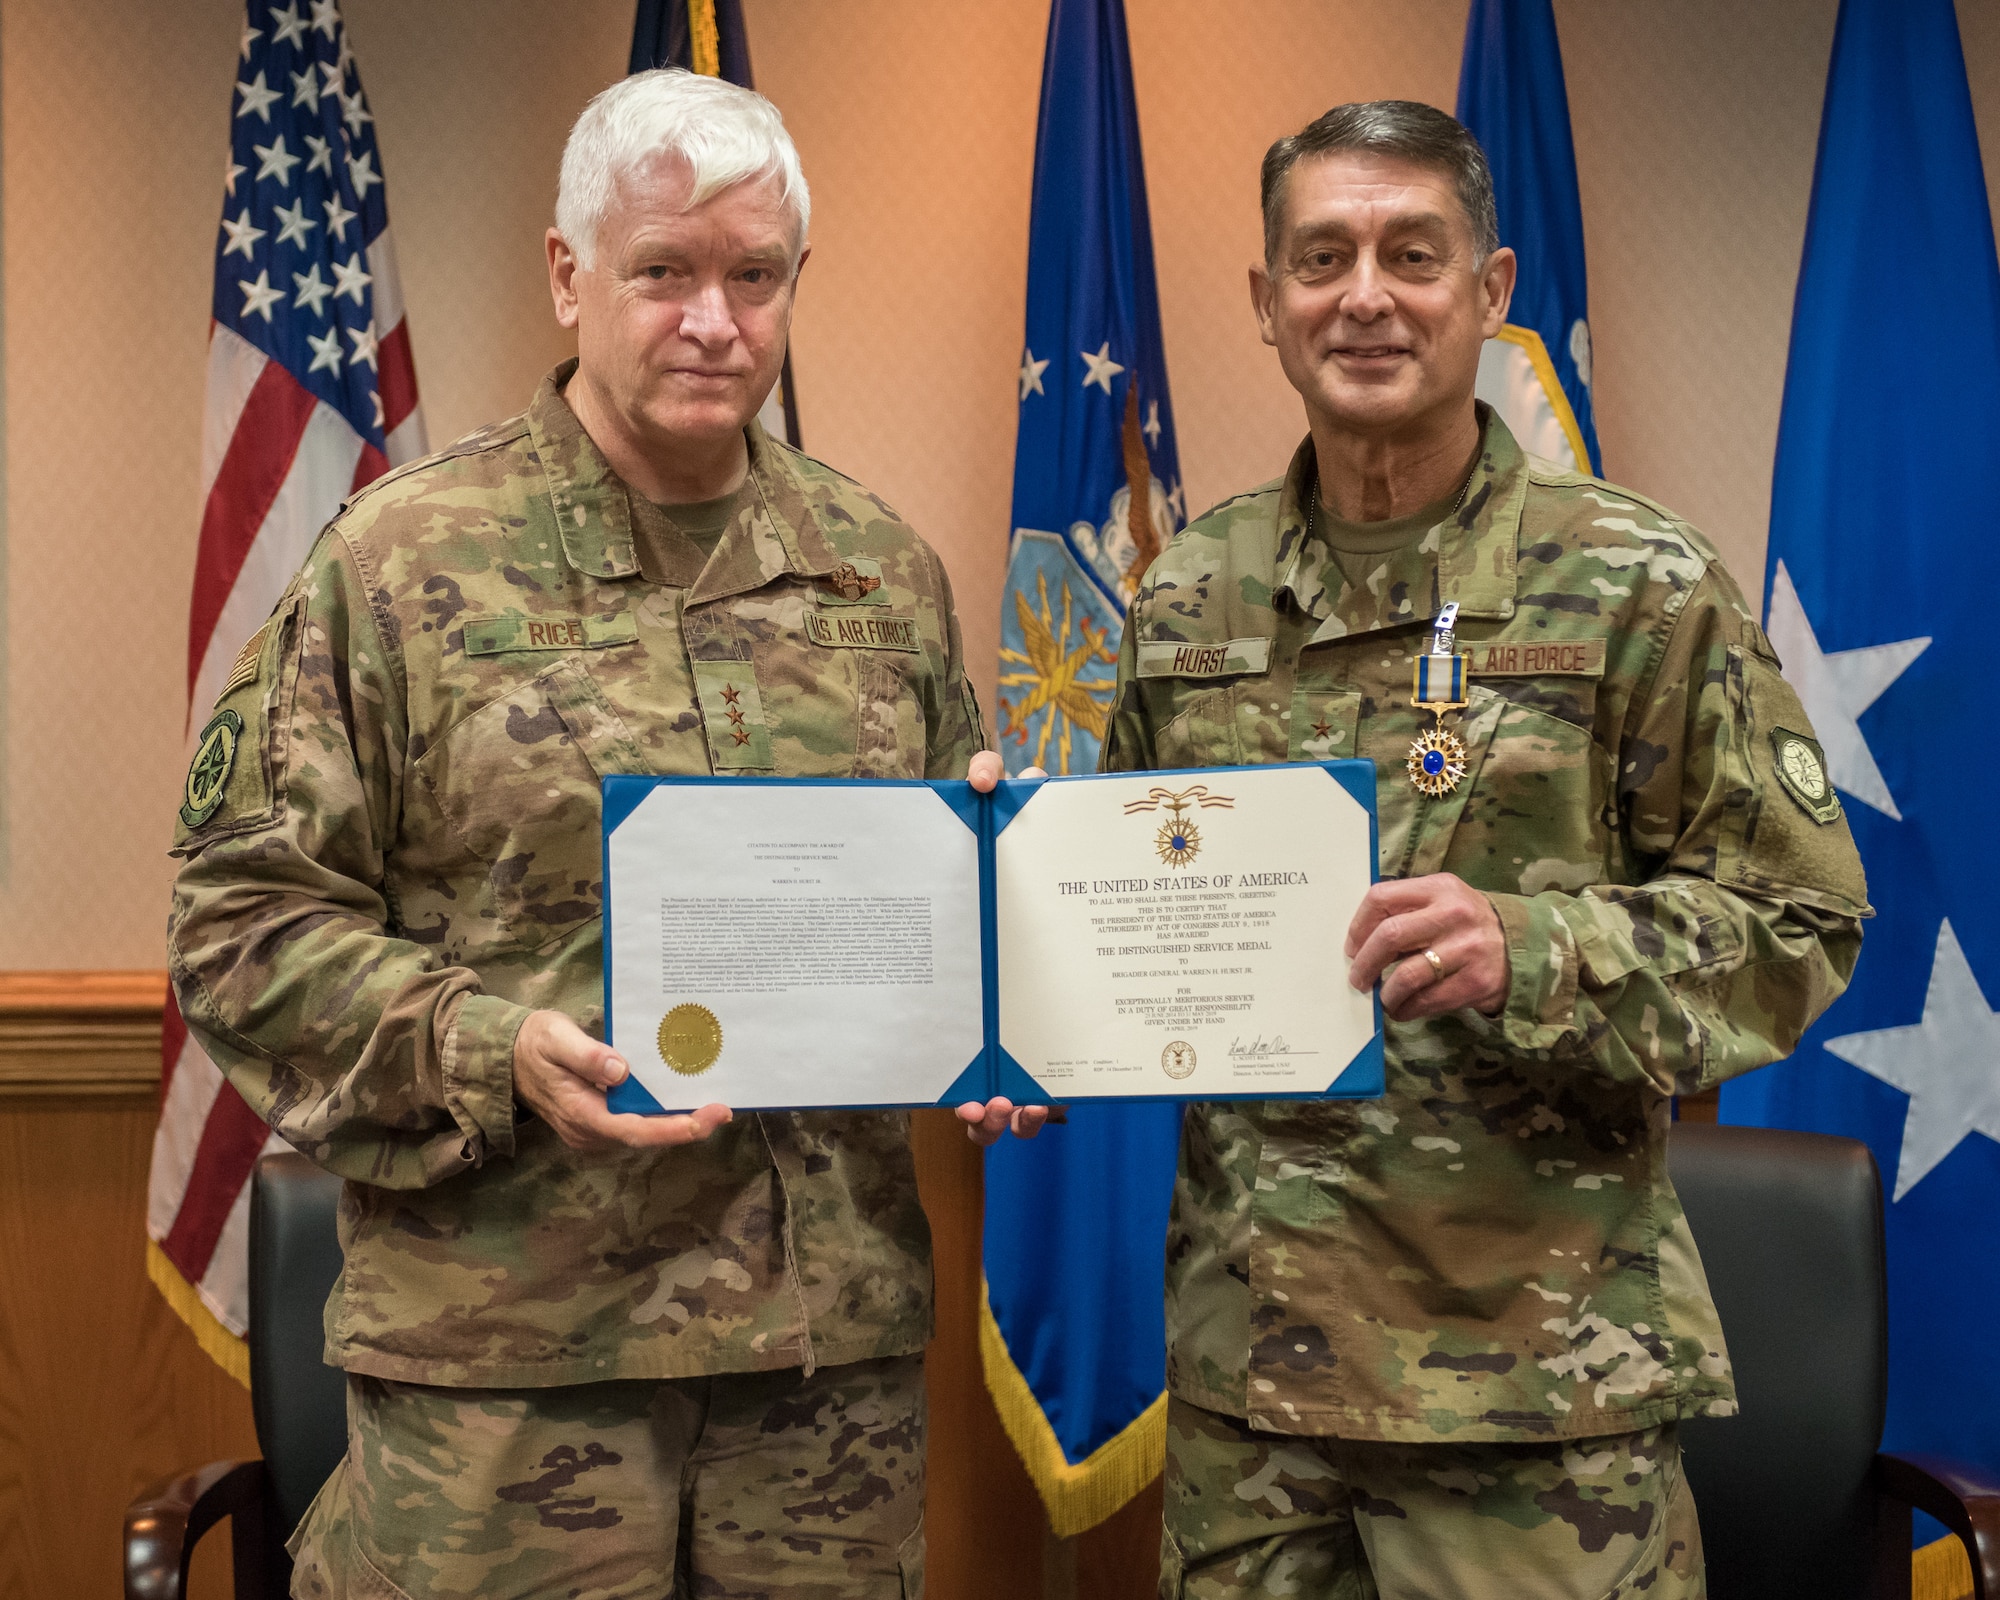 Lt. Gen. L. Scott Rice (left), director of the Air National Guard, presents the Distinguished Service Medal to Brig. Gen. Warren Hurst, Kentucky’s assistant adjutant general for Air, during a ceremony at the Kentucky Air National Guard base in Louisville, Ky., Aug. 10, 2019. Hurst earned the honor for exceptionally meritorious service in duties of great responsibility. (U.S. Air National Guard photo by Dale Greer)